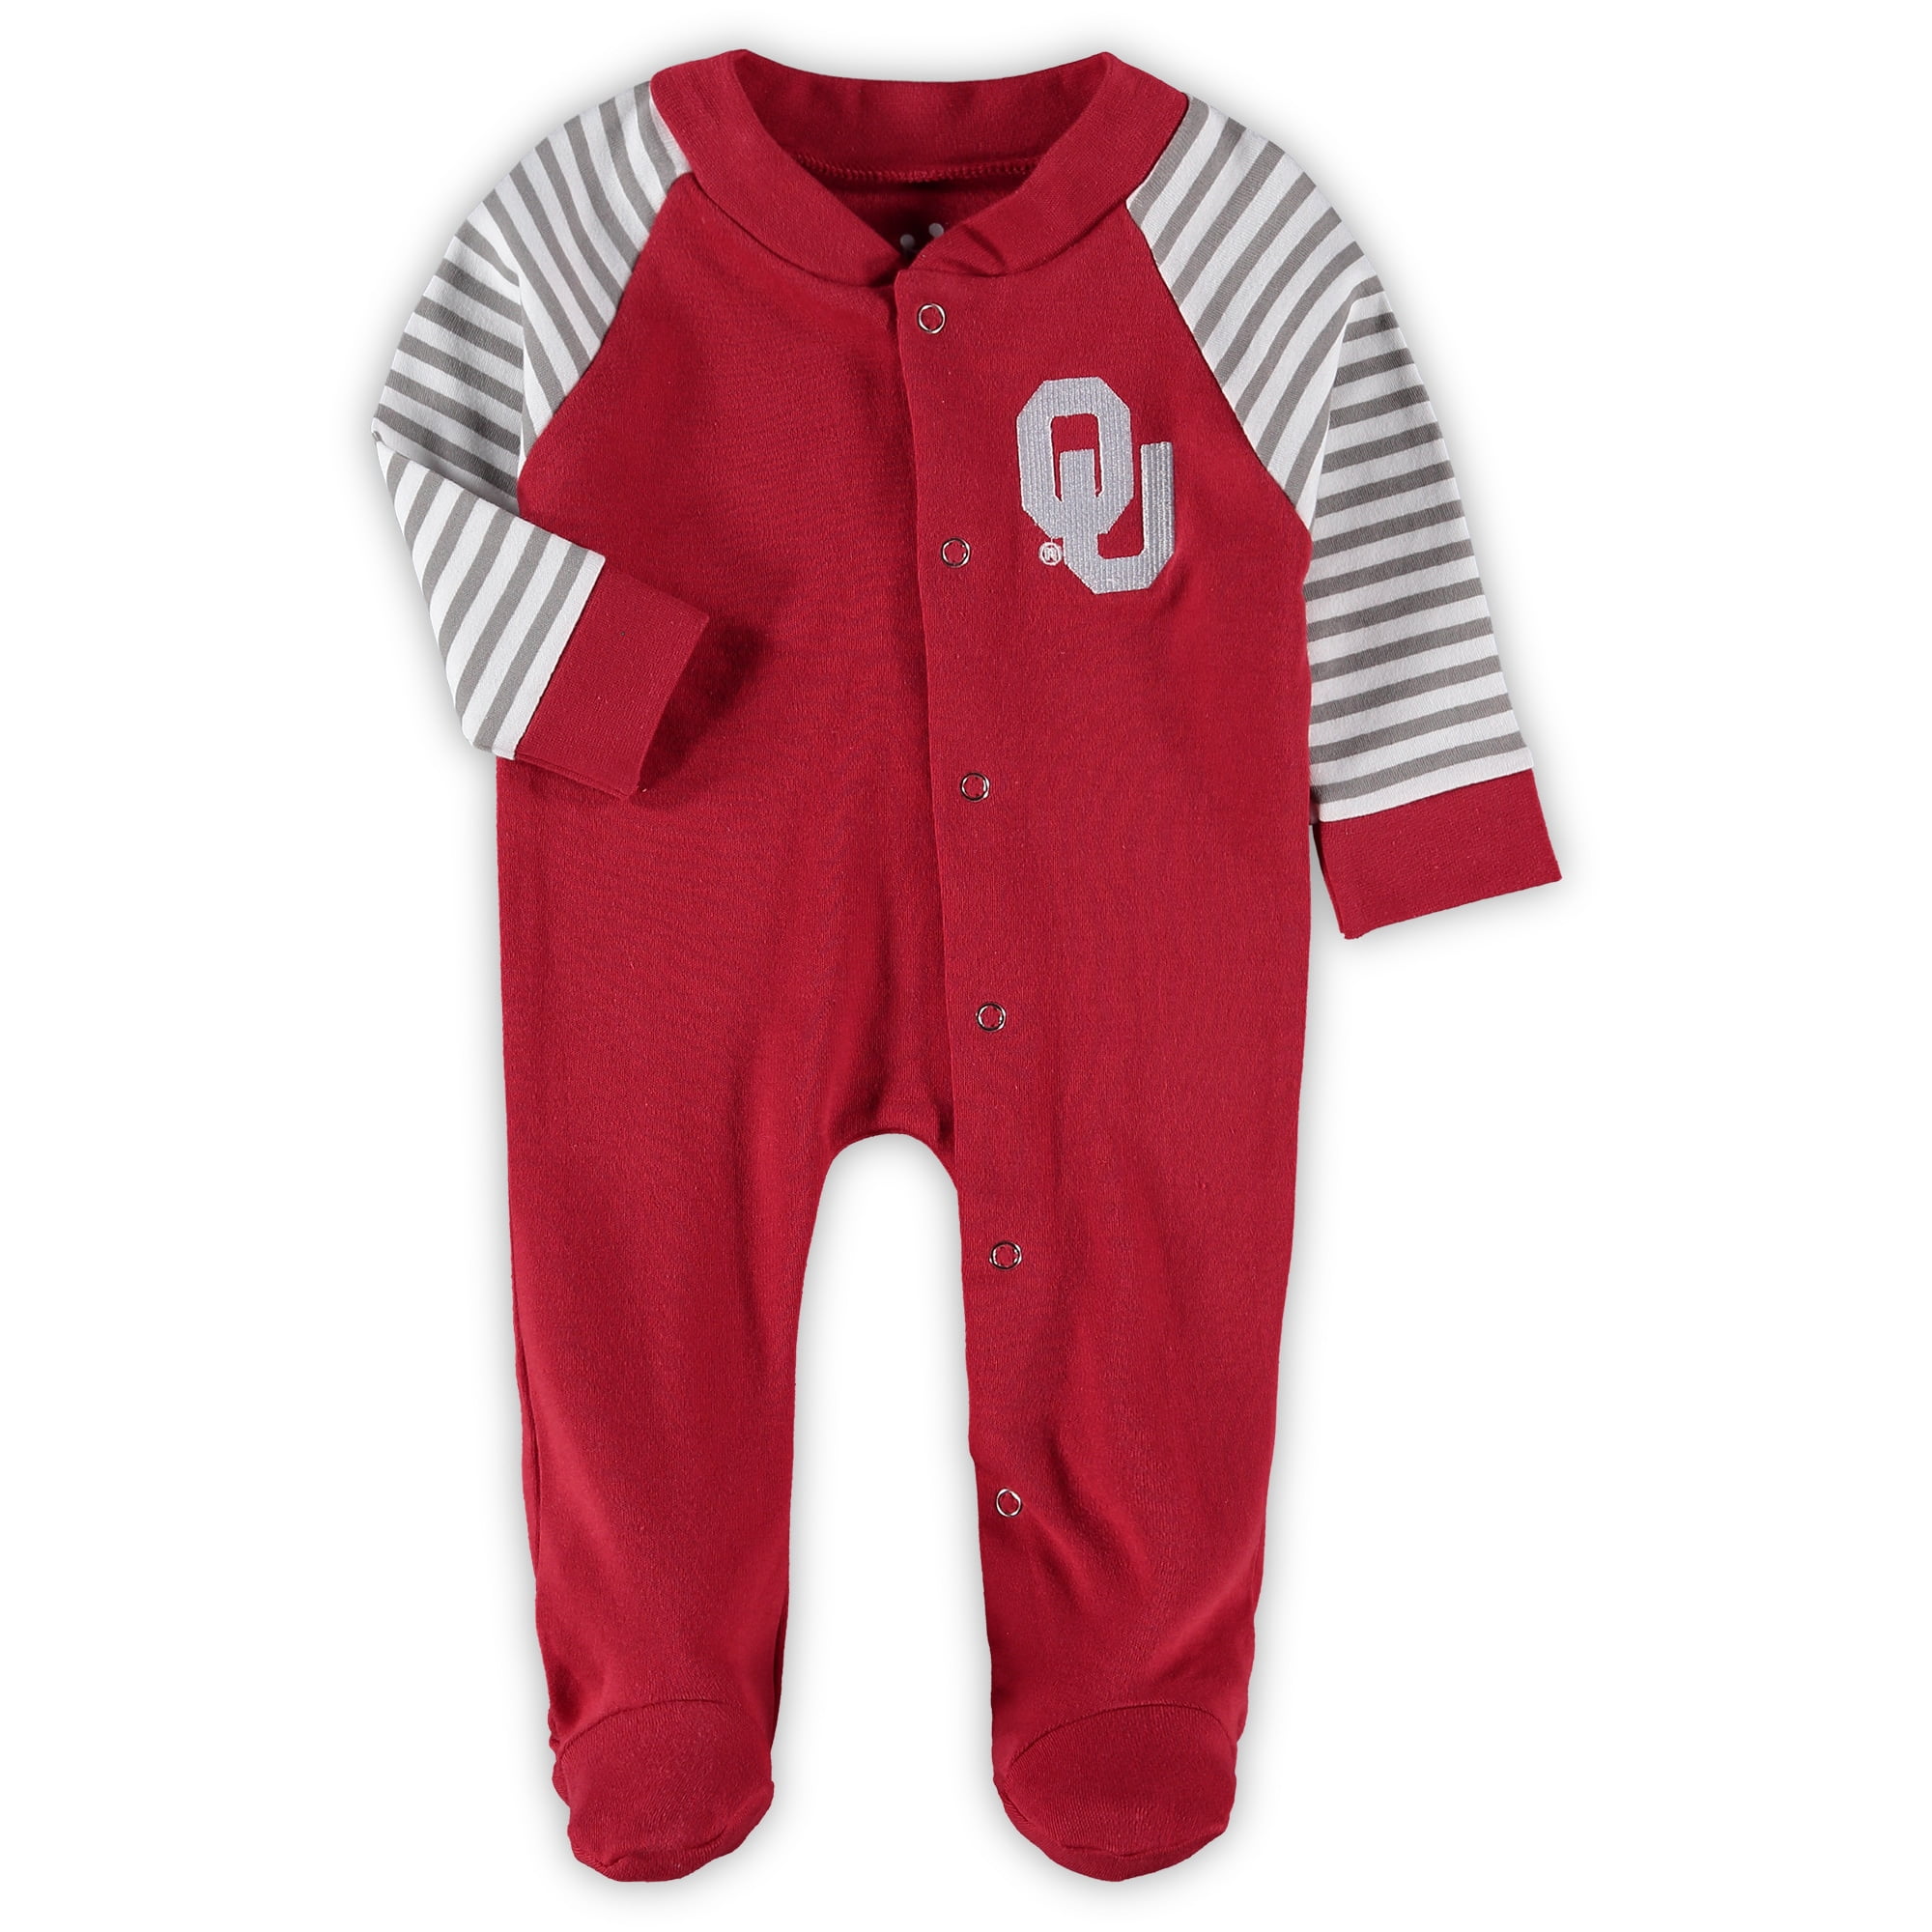 NEW Oklahoma Sooners Baby Romper Size 18M 18 Mo Mos Boys Girls Sleeper Coverall